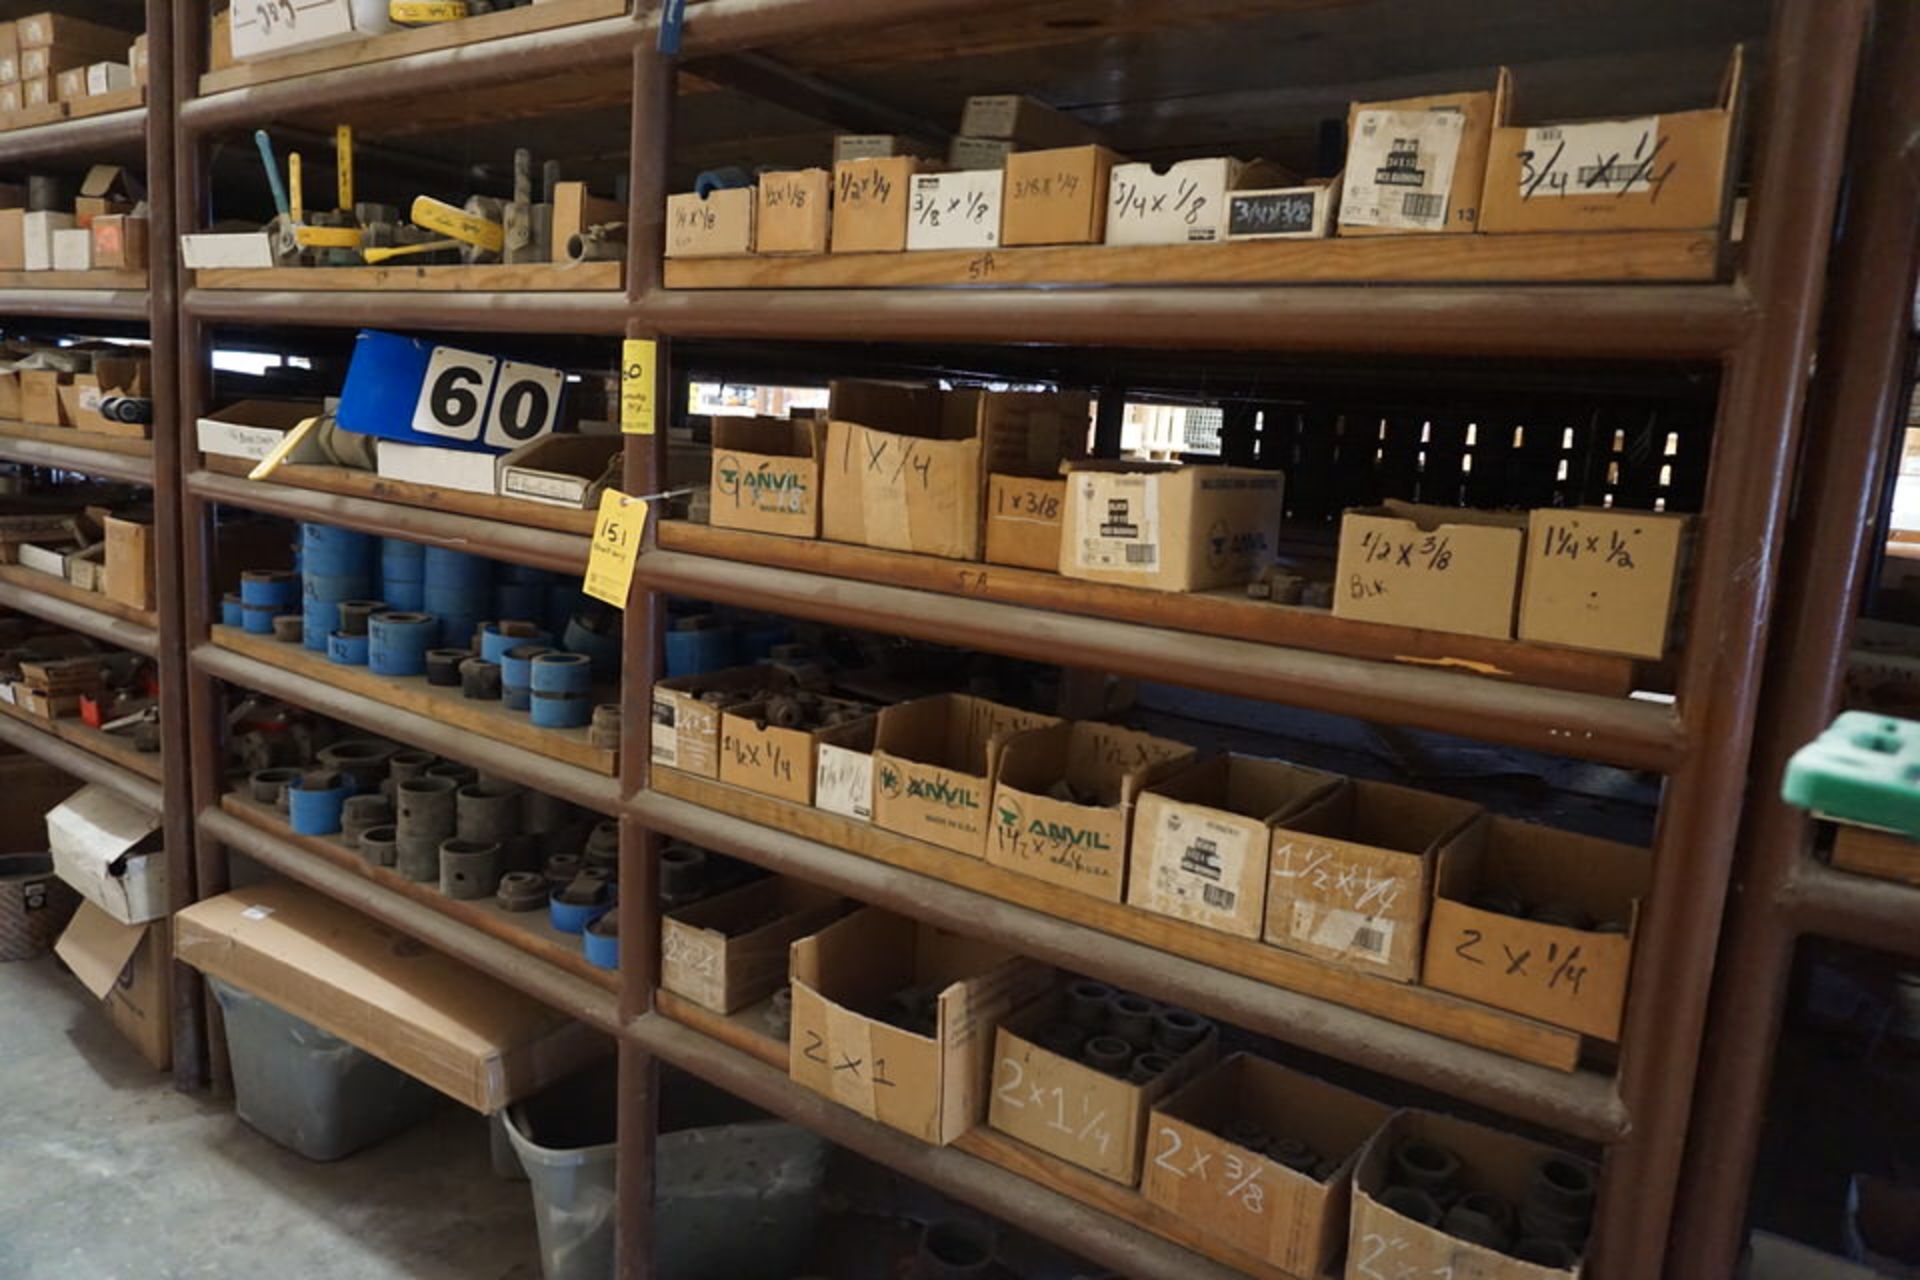 CONT OF SHELF: ASSORT SIZE BALL VALVES, PIPE PLUGS, PIPE REDUCERS, CHECK VALVES, APPROX 400 PCS